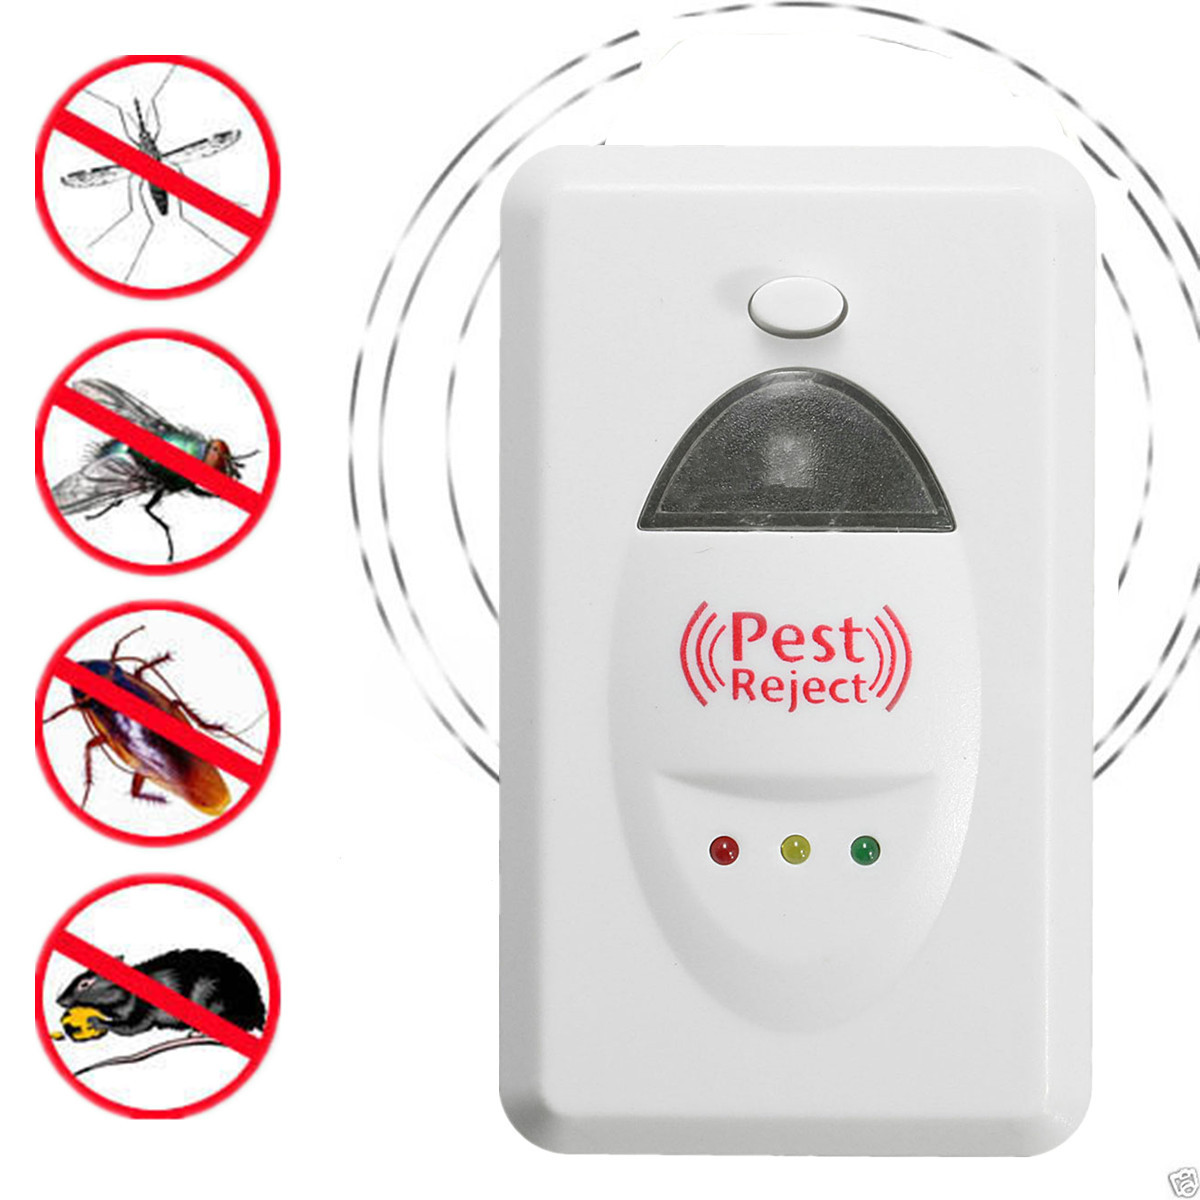 Effective-Safe-Electromagnetic-Electronic-Pest-Repeller-Killer-Insect-Rodent-Mosquitoes-Rat-Cockroac-1397436